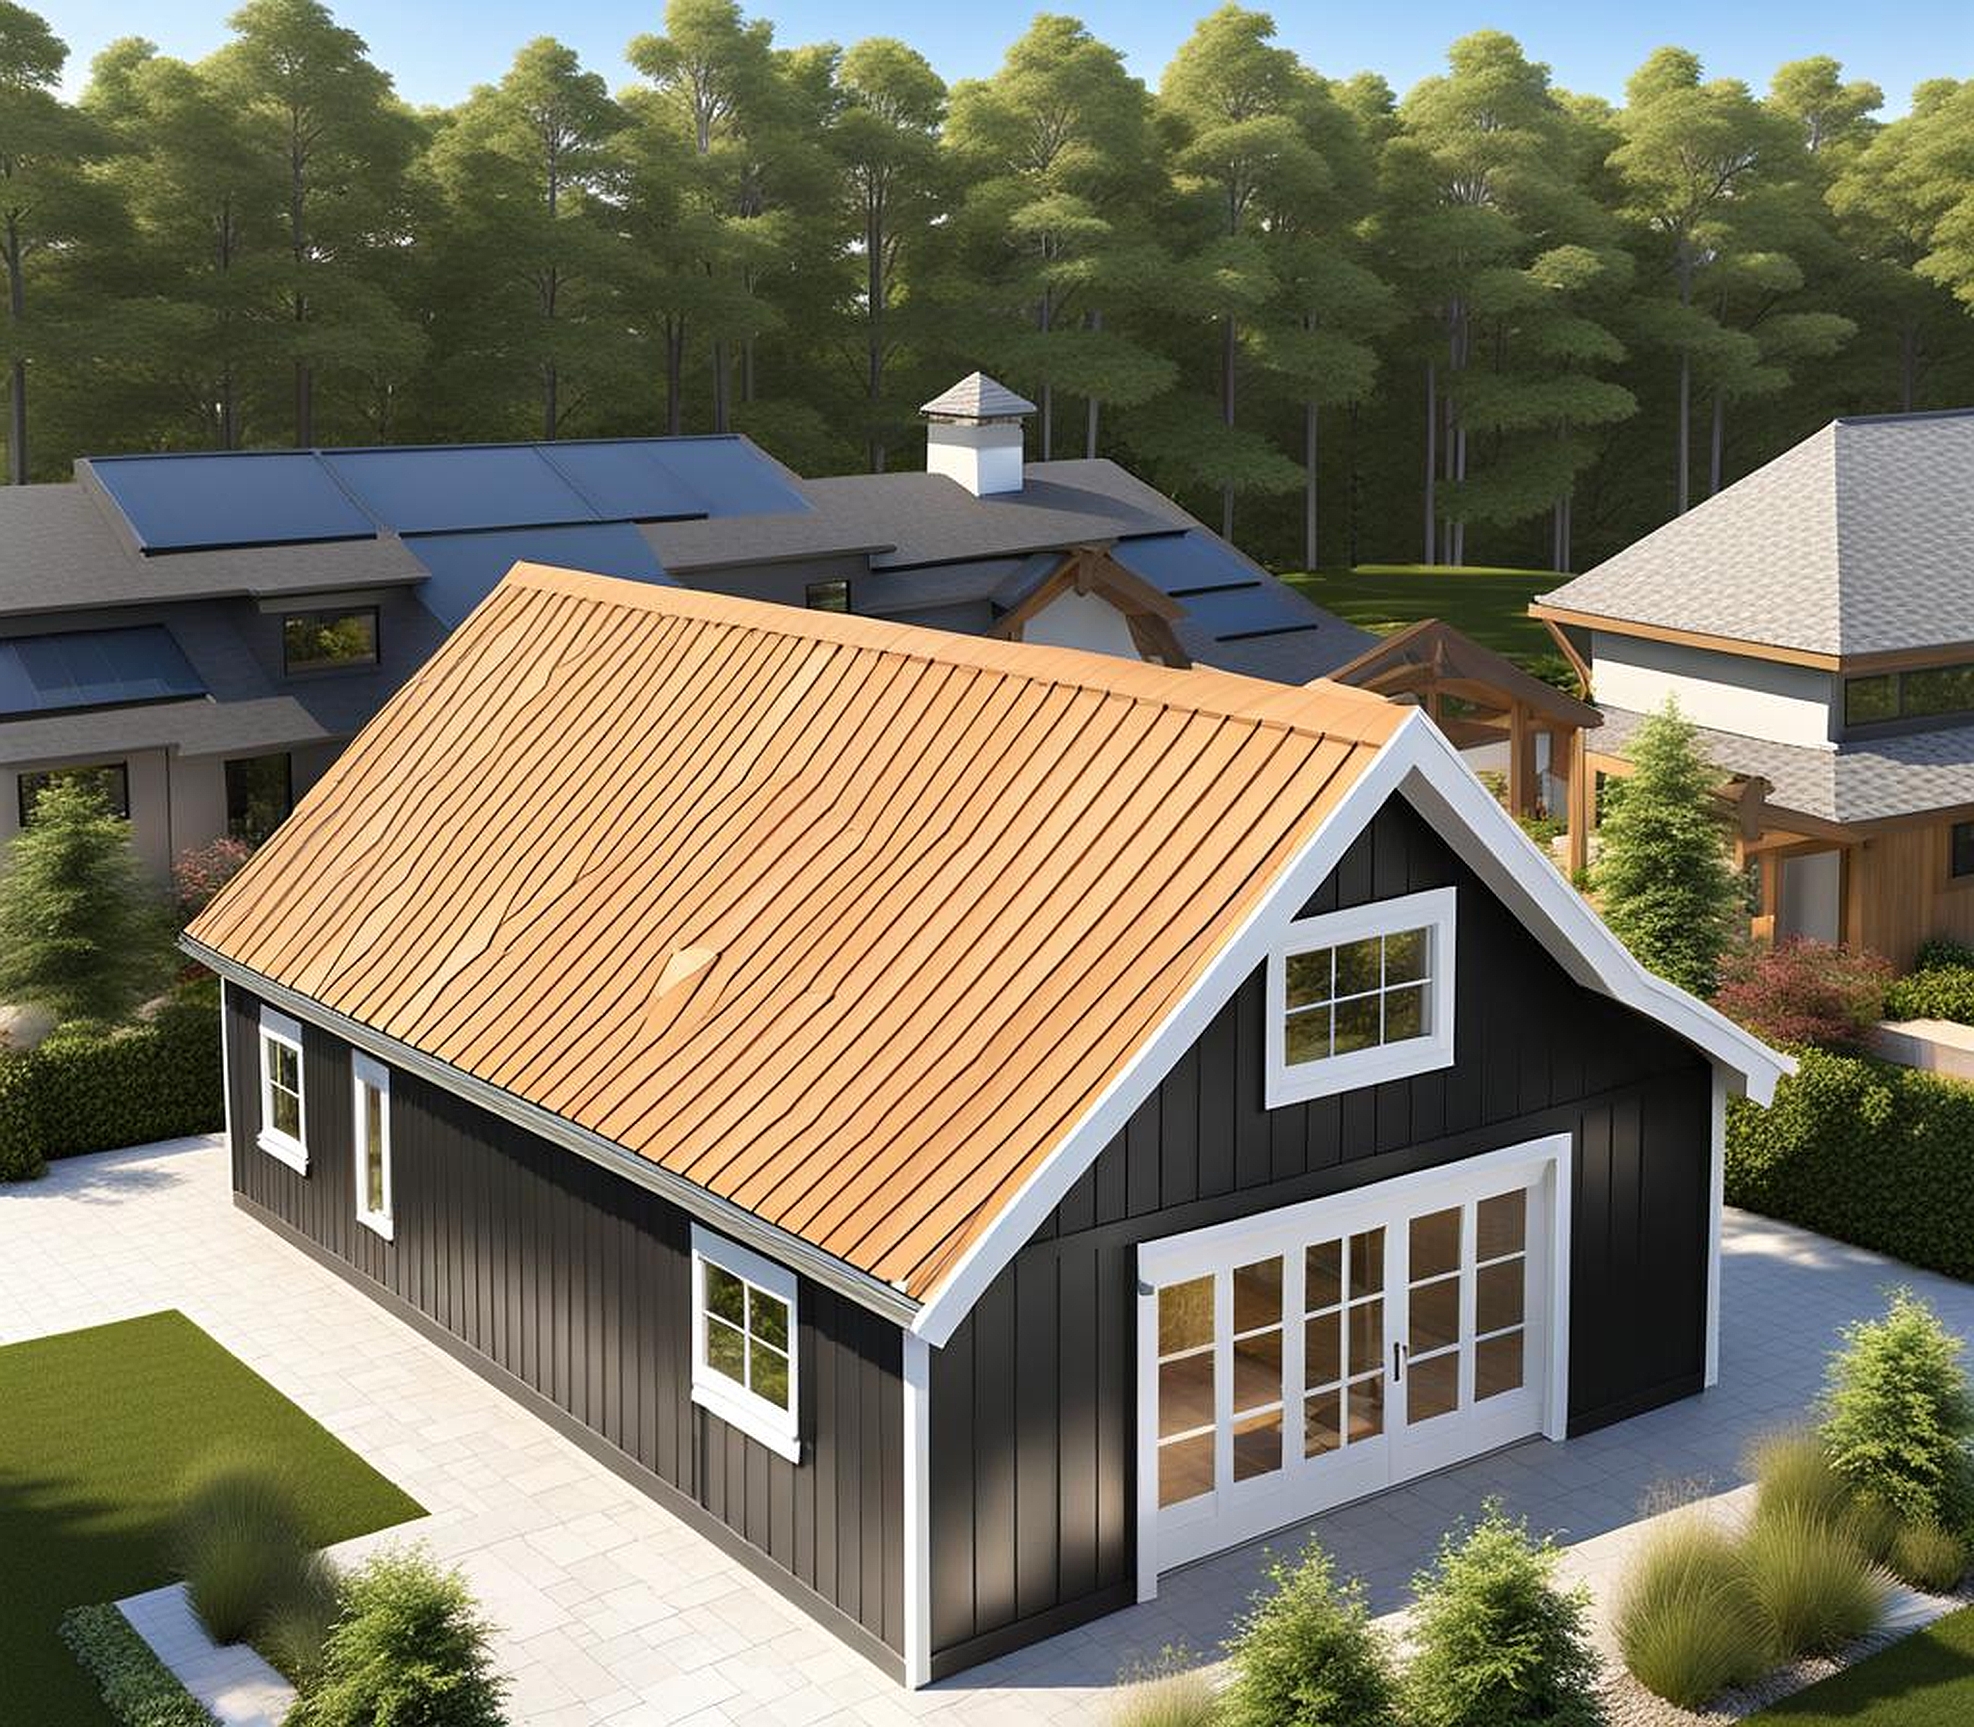 The Perfect Blend of Traditional and Modern Gable Roof Designs